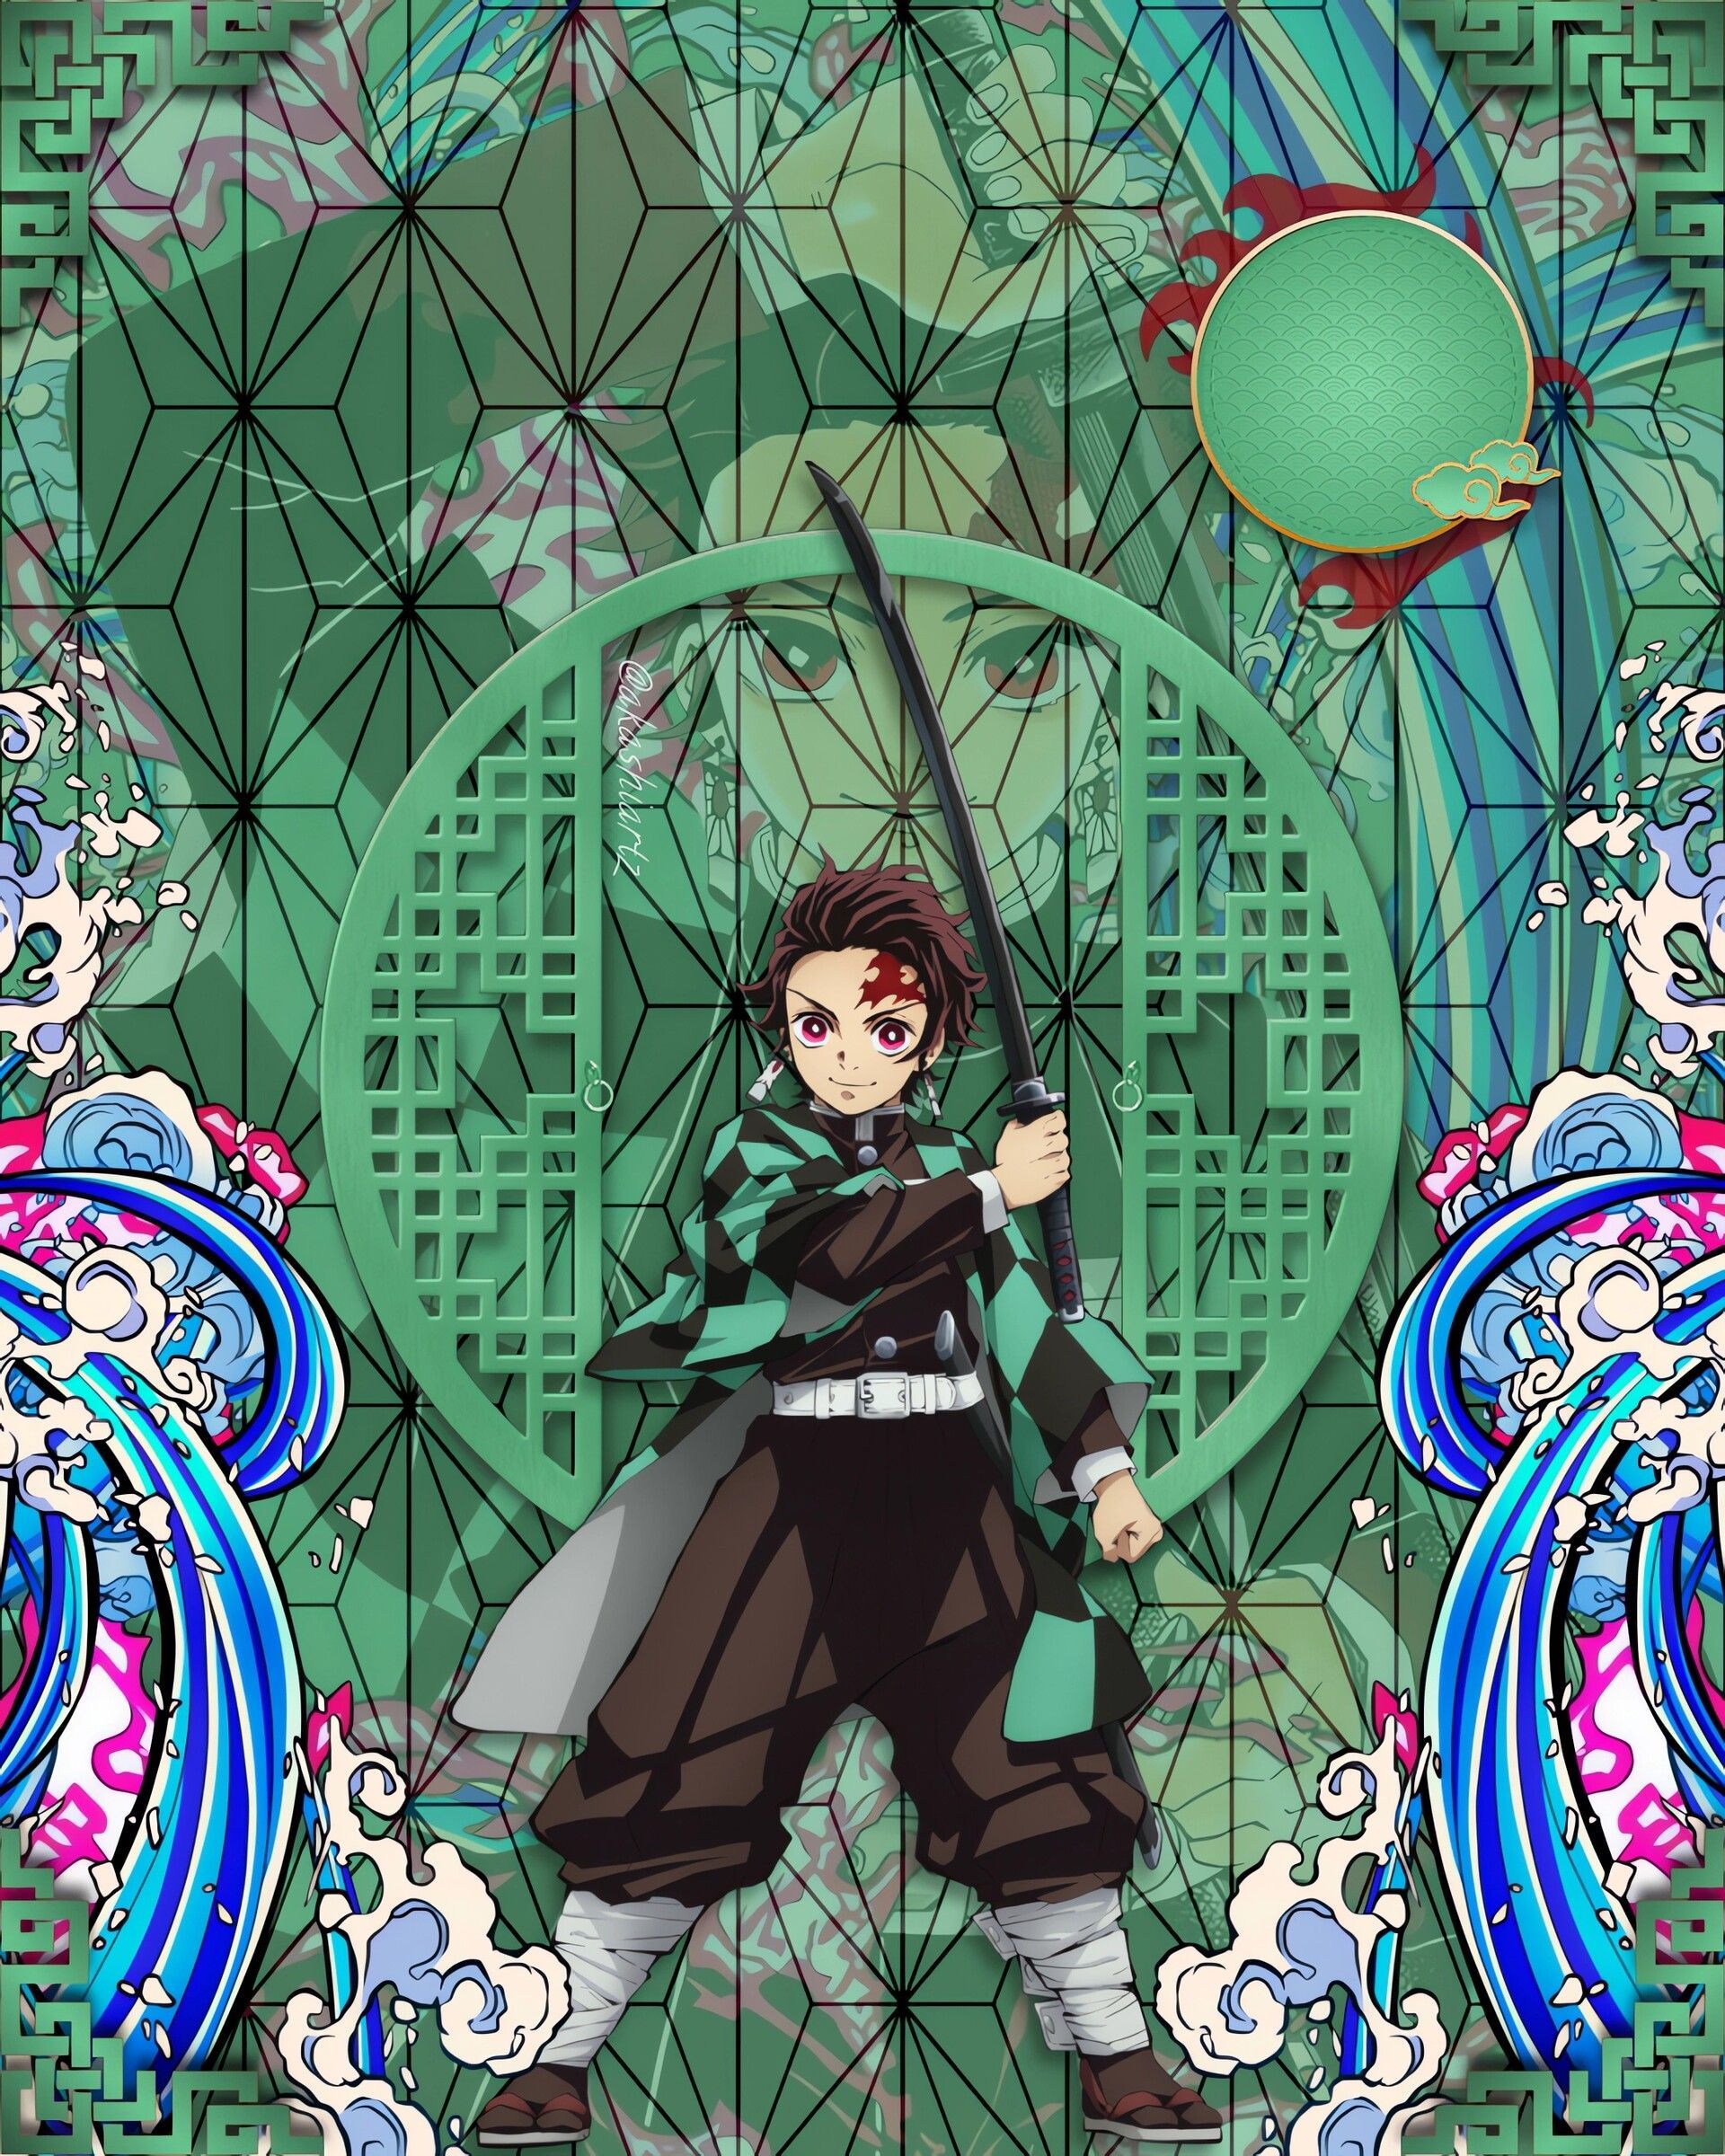 A character from Demon Slayer standing in front of a green background - Tanjiro Kamado